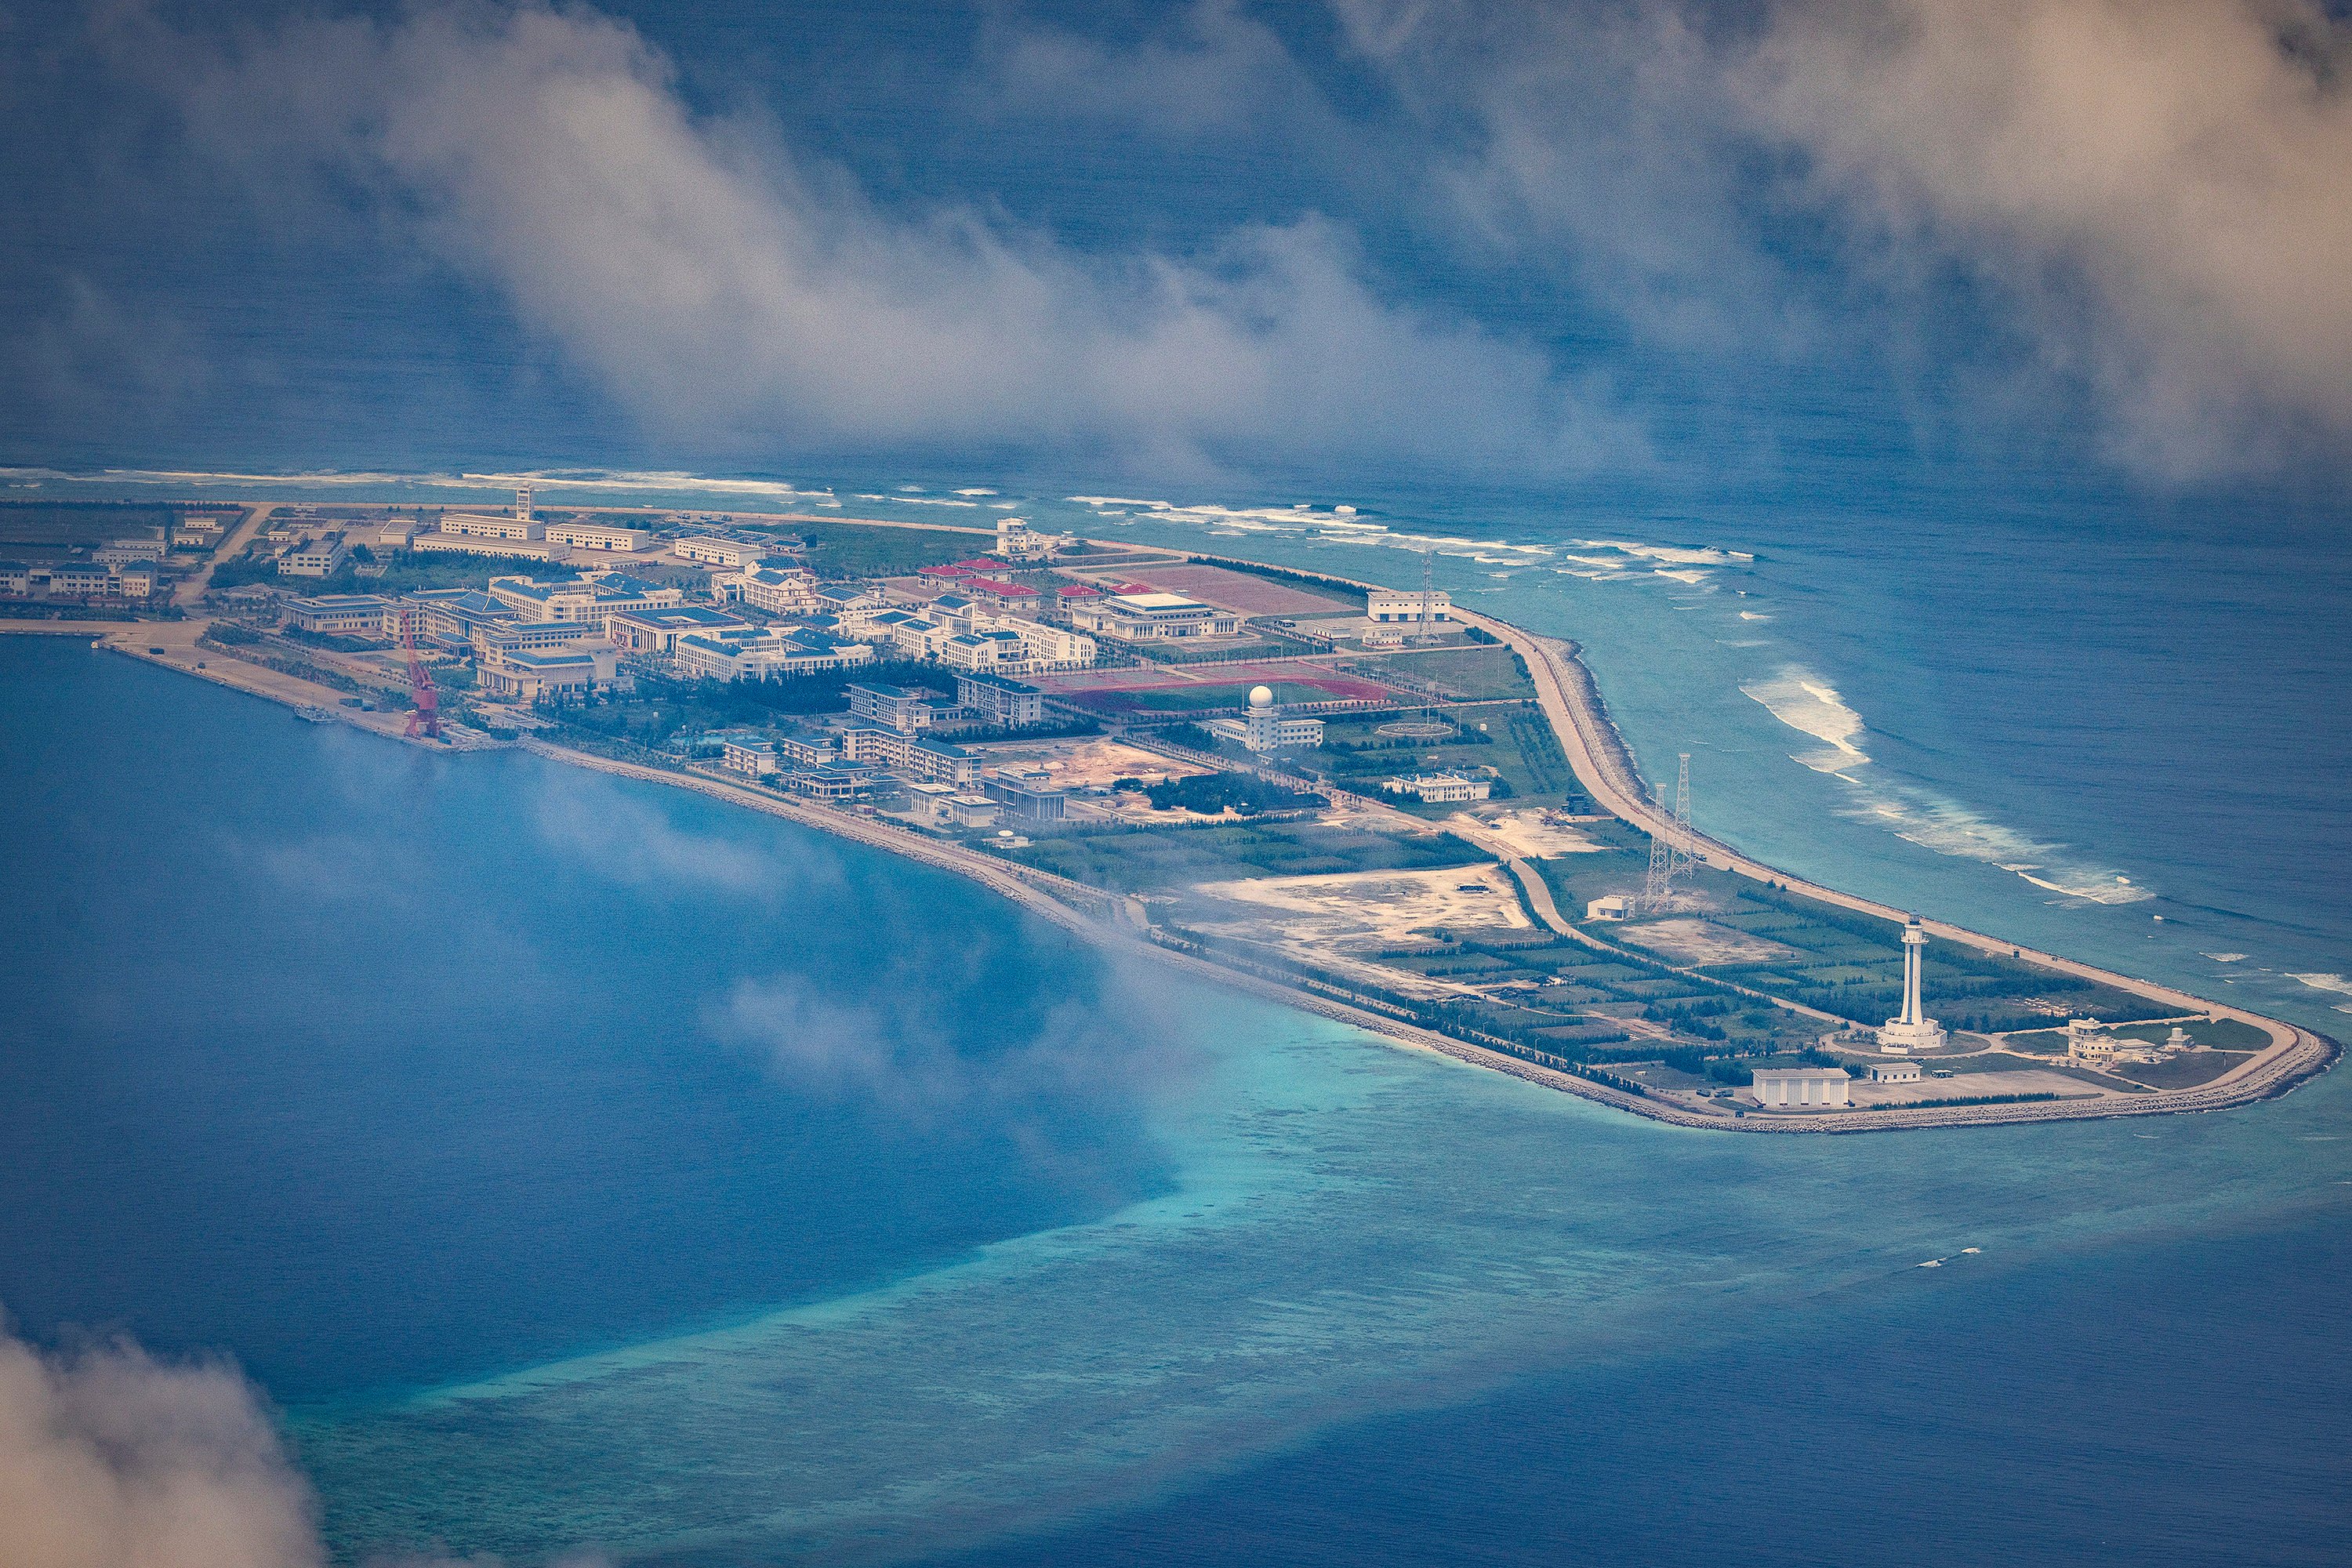 Buildings and structures are seen on the artificial island built by China in Subi Reef in October 2022, in the South China Sea’s Spratly Islands. Photo: TNS